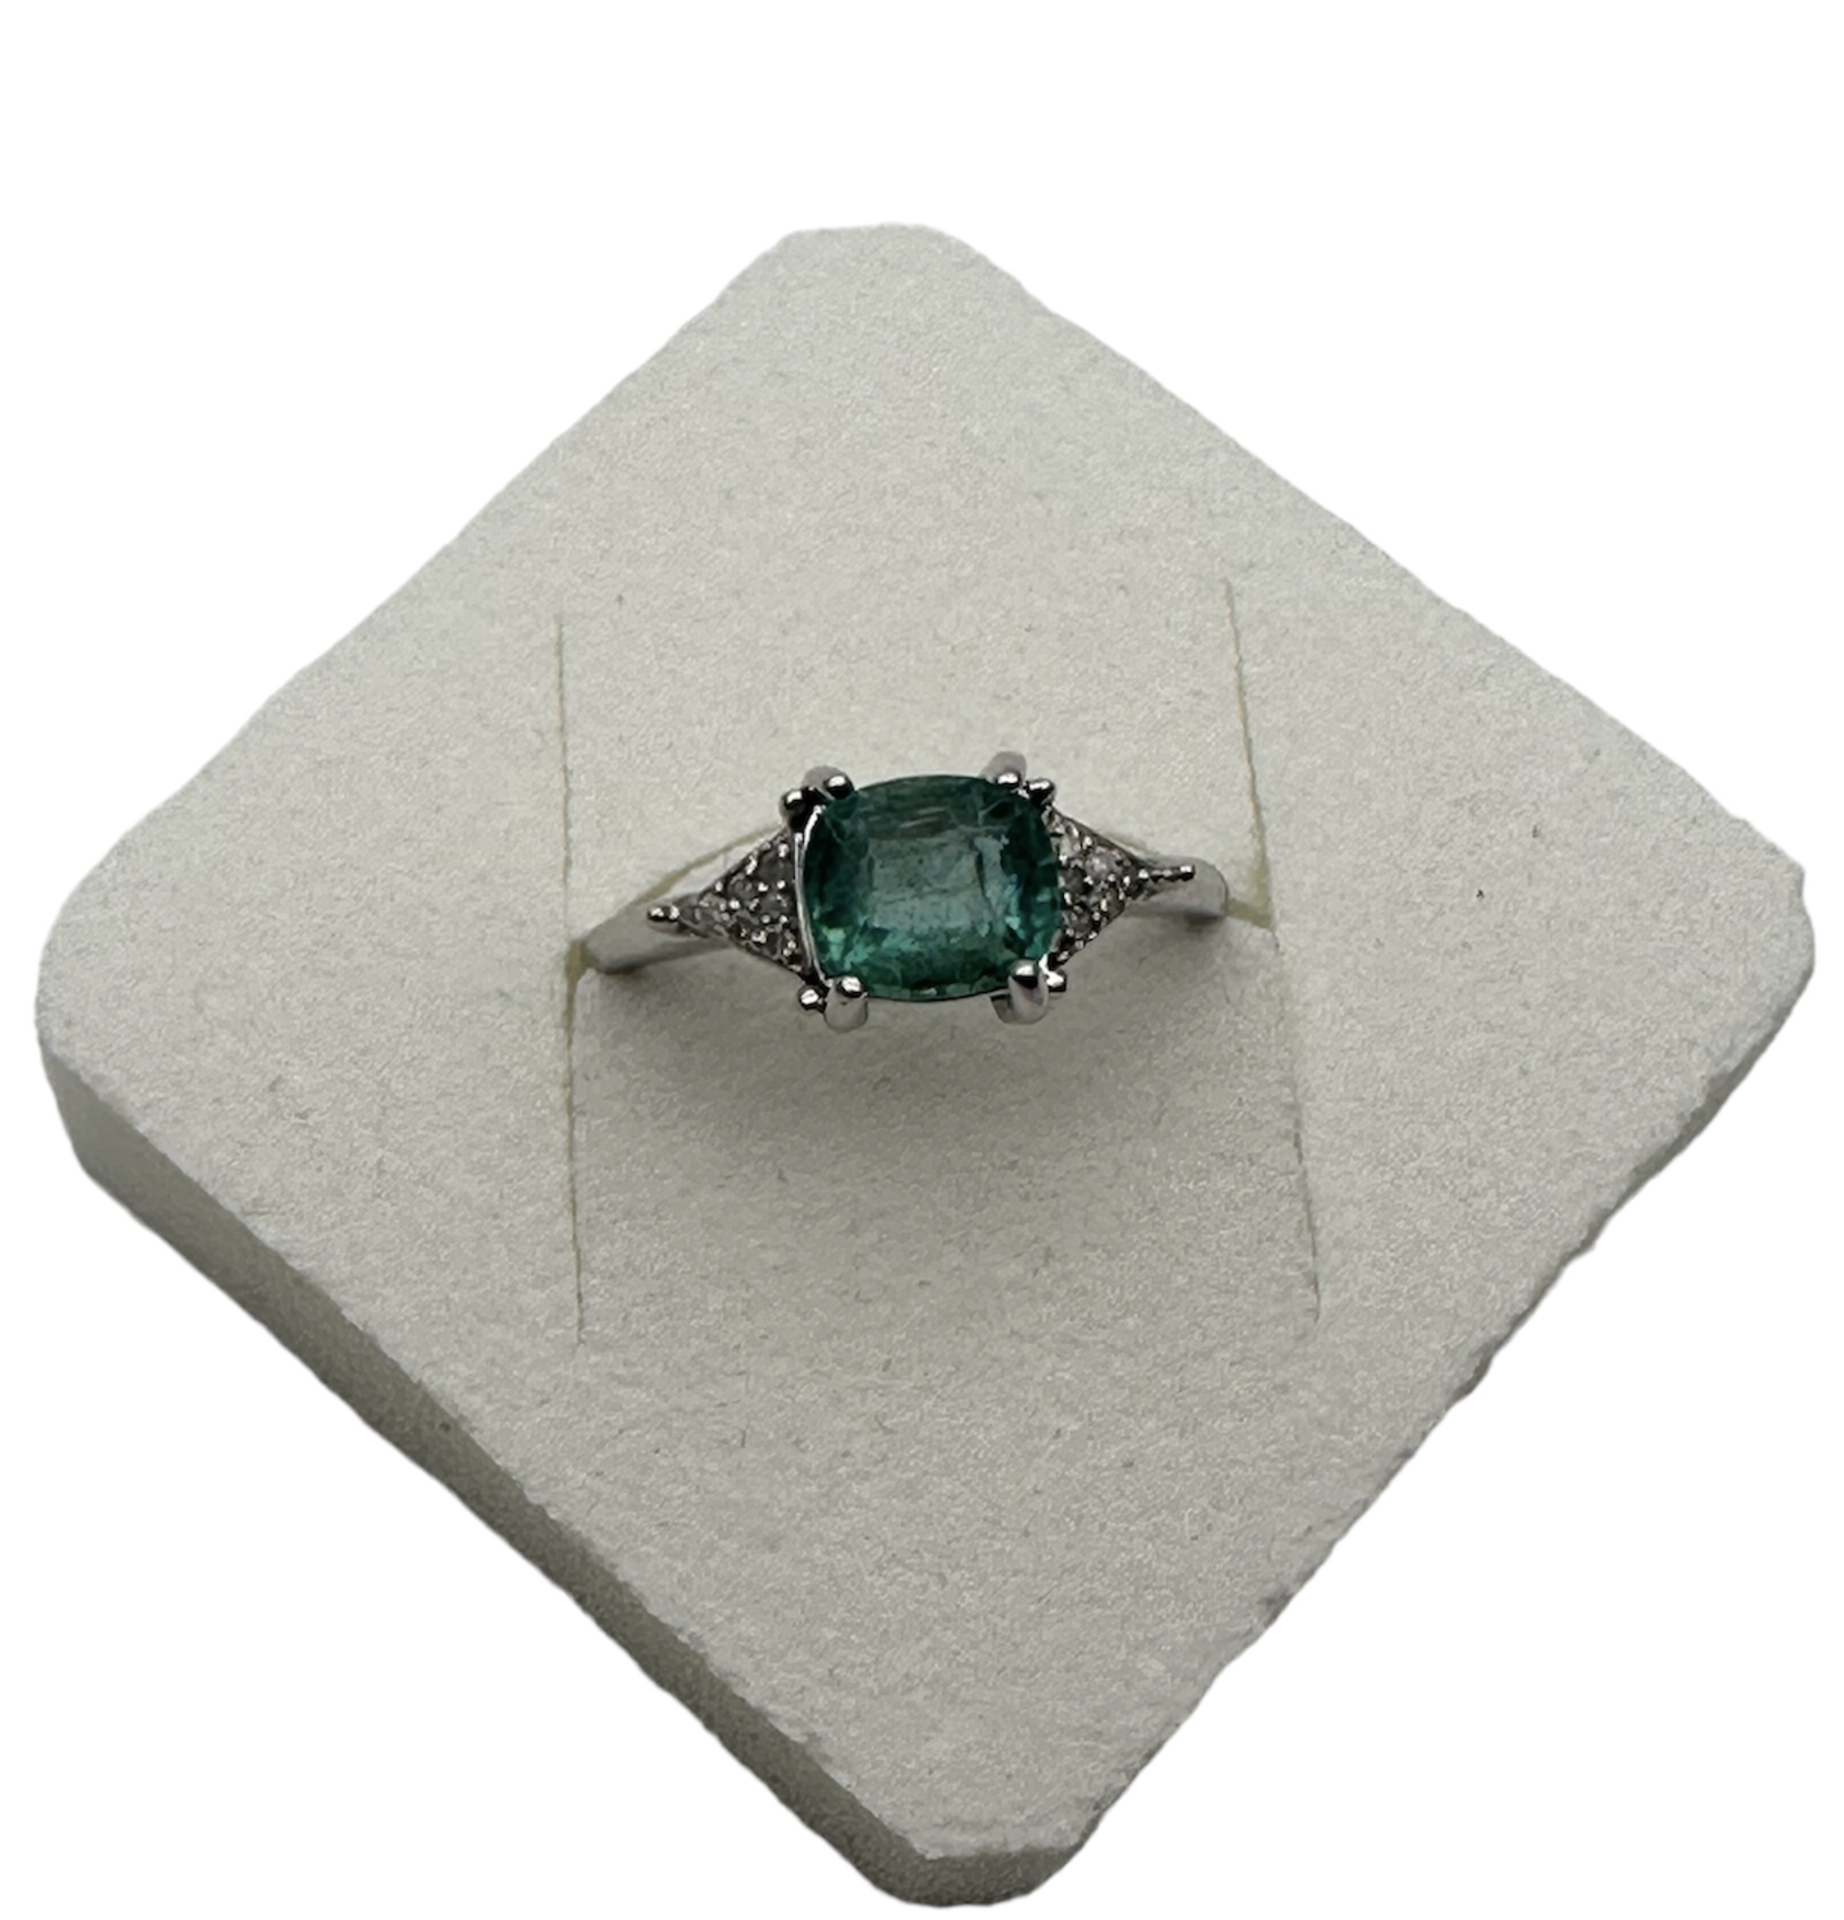 **NO RESERVE** 9K WHITE GOLD DIAMOND AND FLUORITE RING, RING SIZE- N, CENTER STONE 0.90 CARET FLUOR - Image 2 of 2